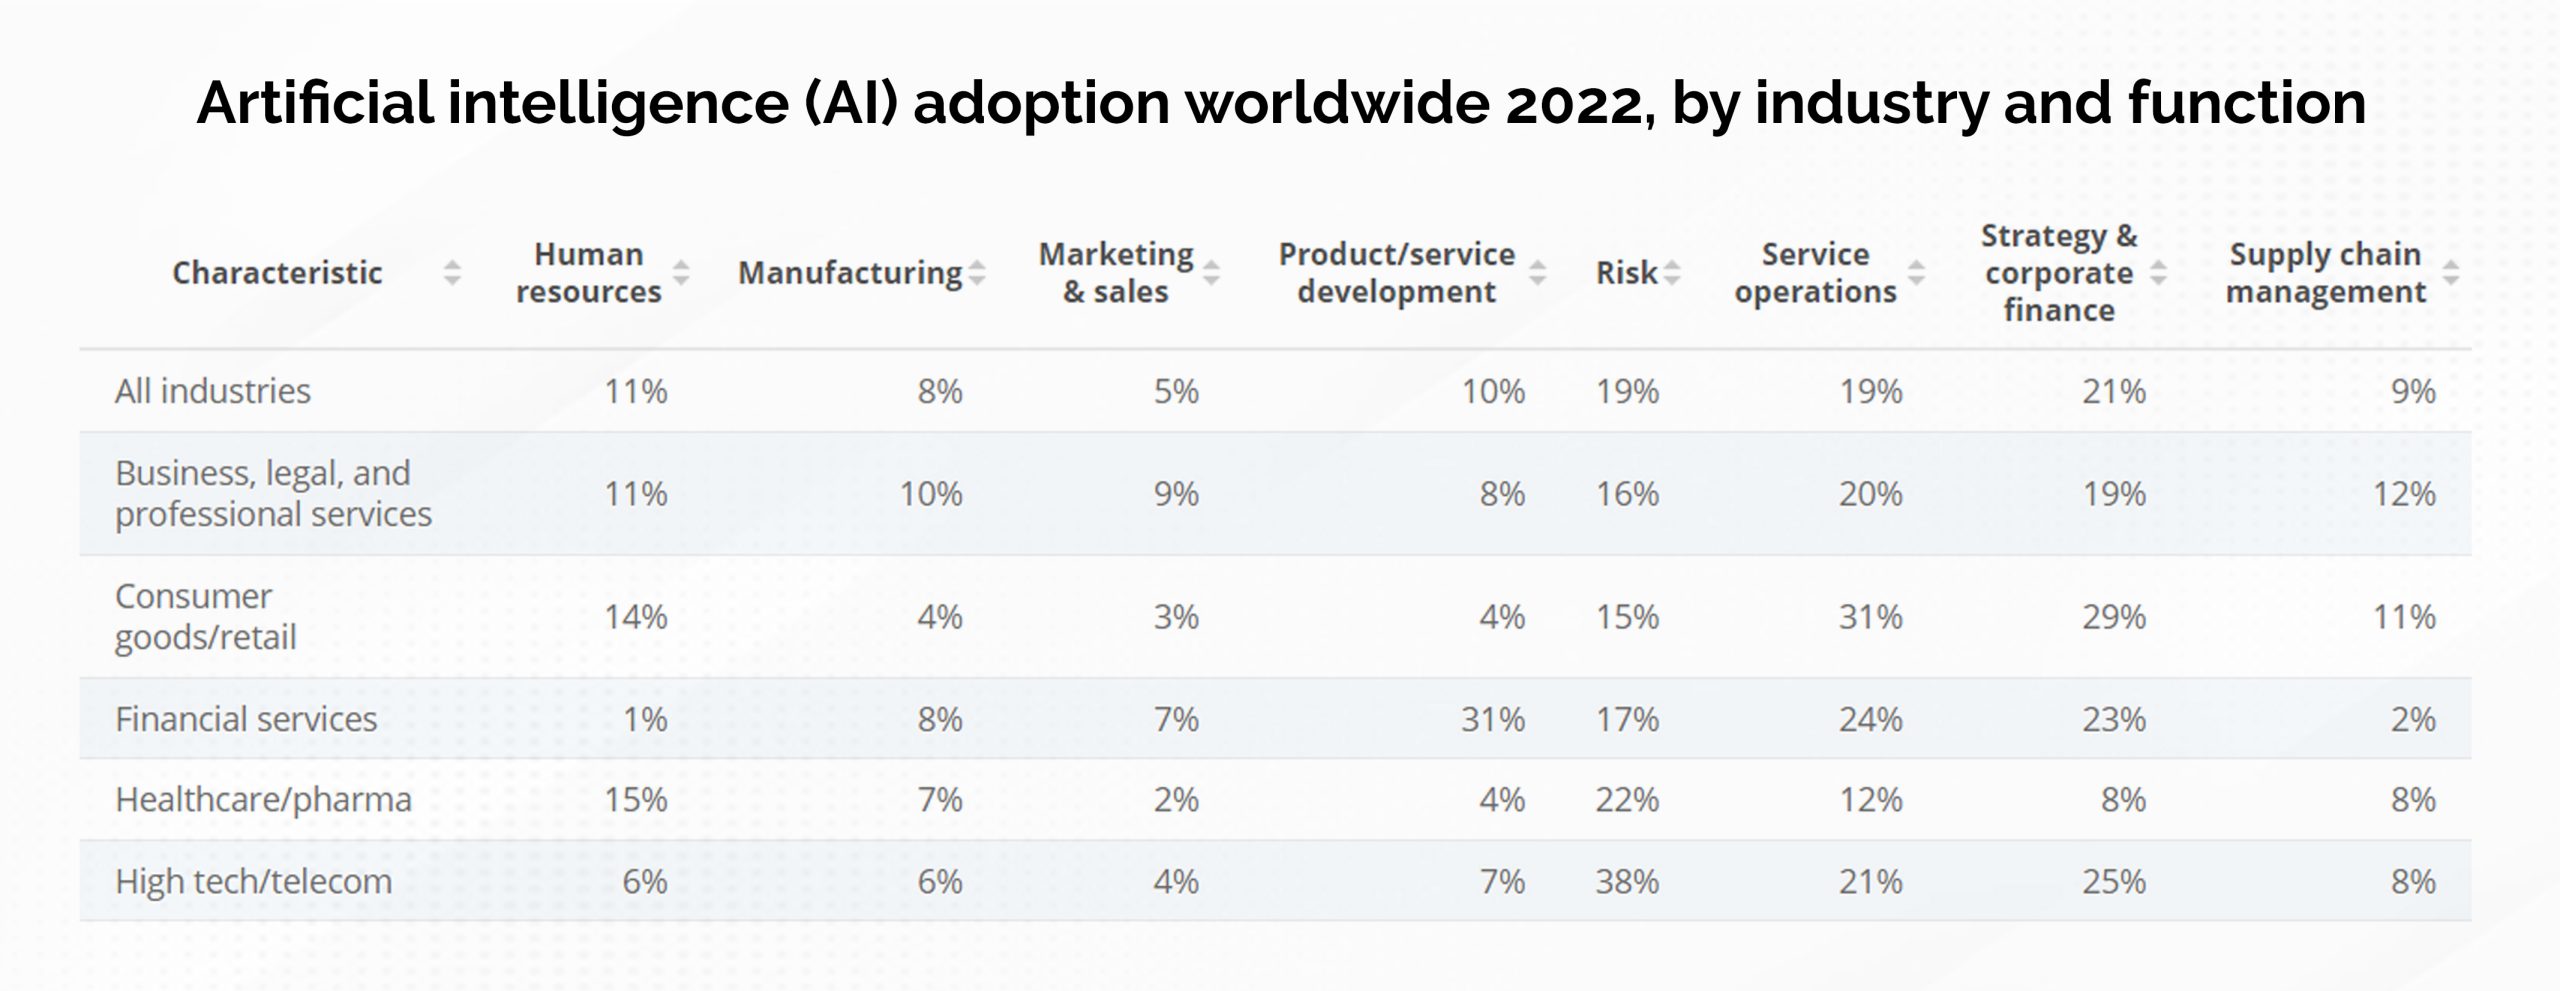 Artificial Intelligence (AI) Adoption Worldwide 2022, by industry and function